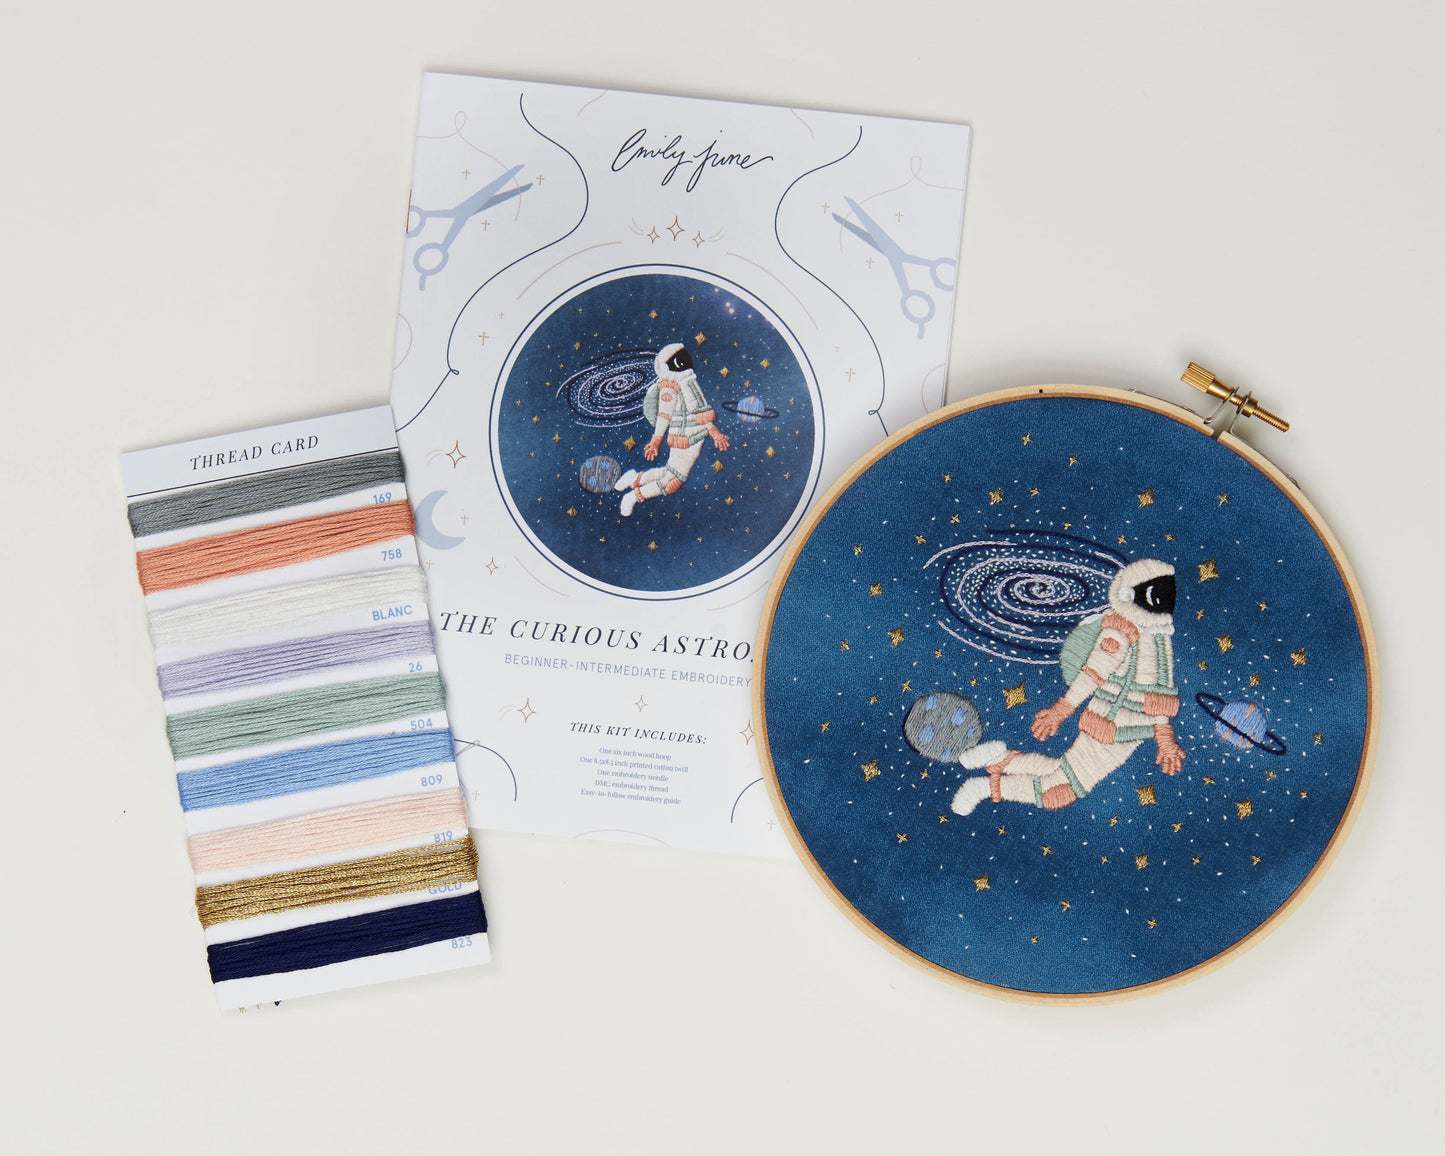 Blush astronaut in outer space hand embroidery kit for outer space nursery or decor with planets and stars with printed embroidery fabric, wood embroidery hoop, embroidery floss, embroidery needle and embroidery guide